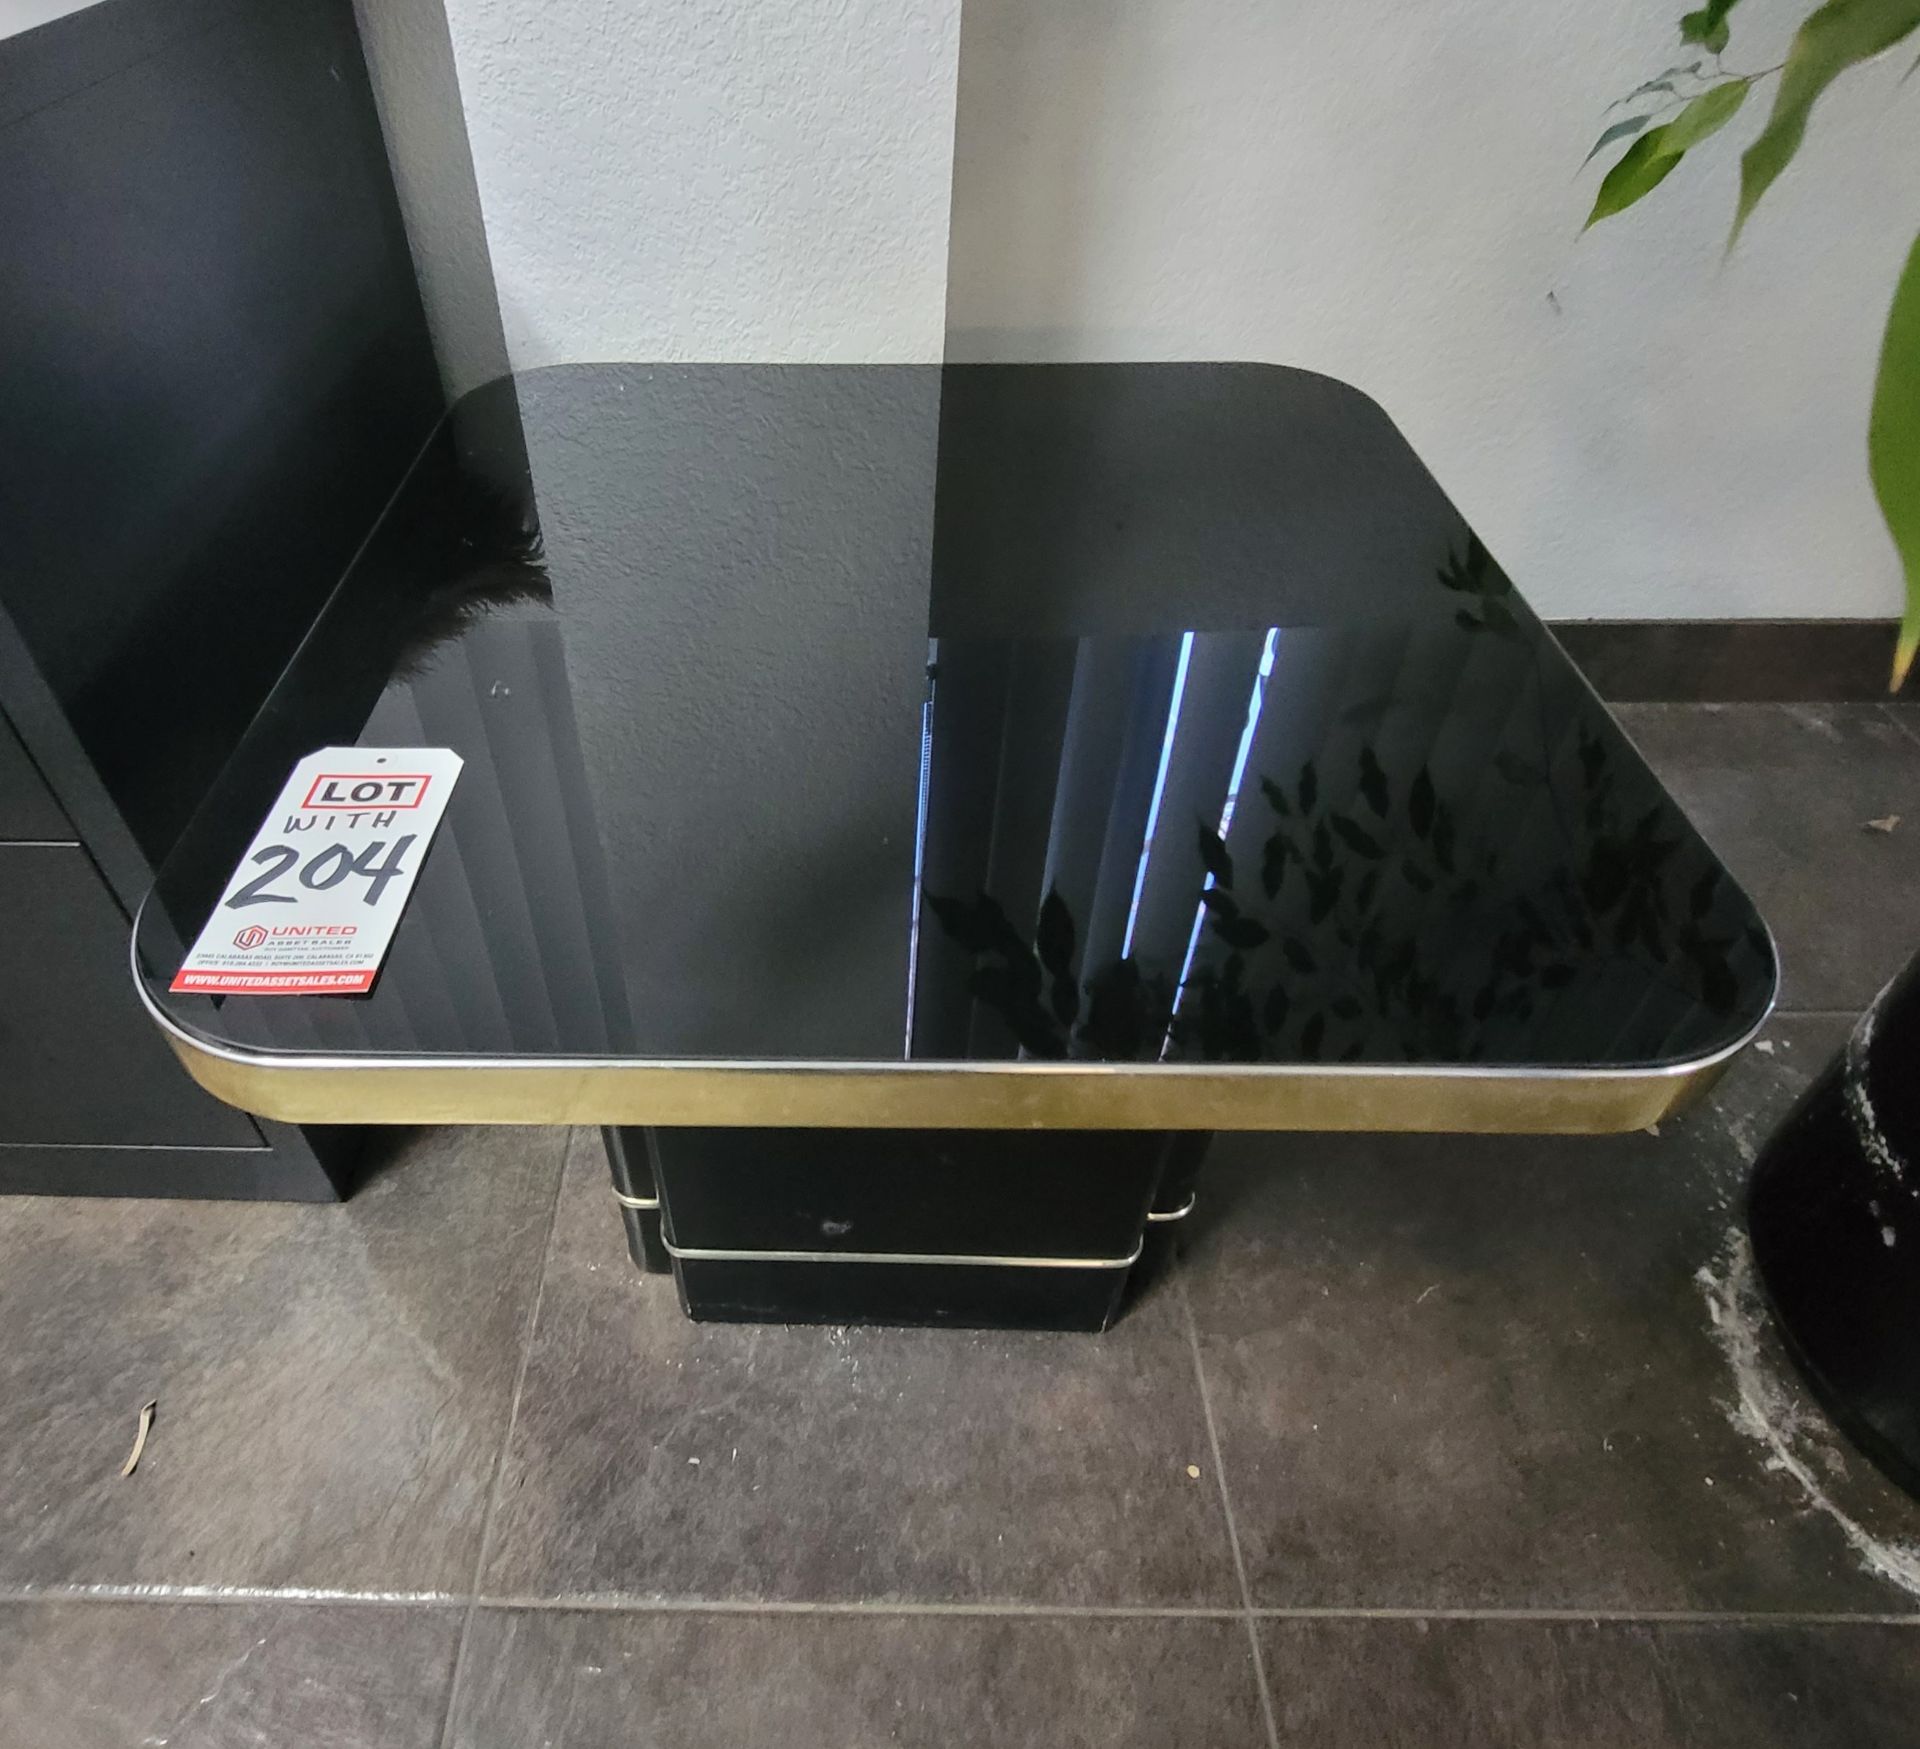 LOT - END TABLE & DISPLAY TABLE SET, COLOR: BLACK W/ GOLD METAL TRIM, CONTENTS NOT INCLUDED - Image 2 of 2